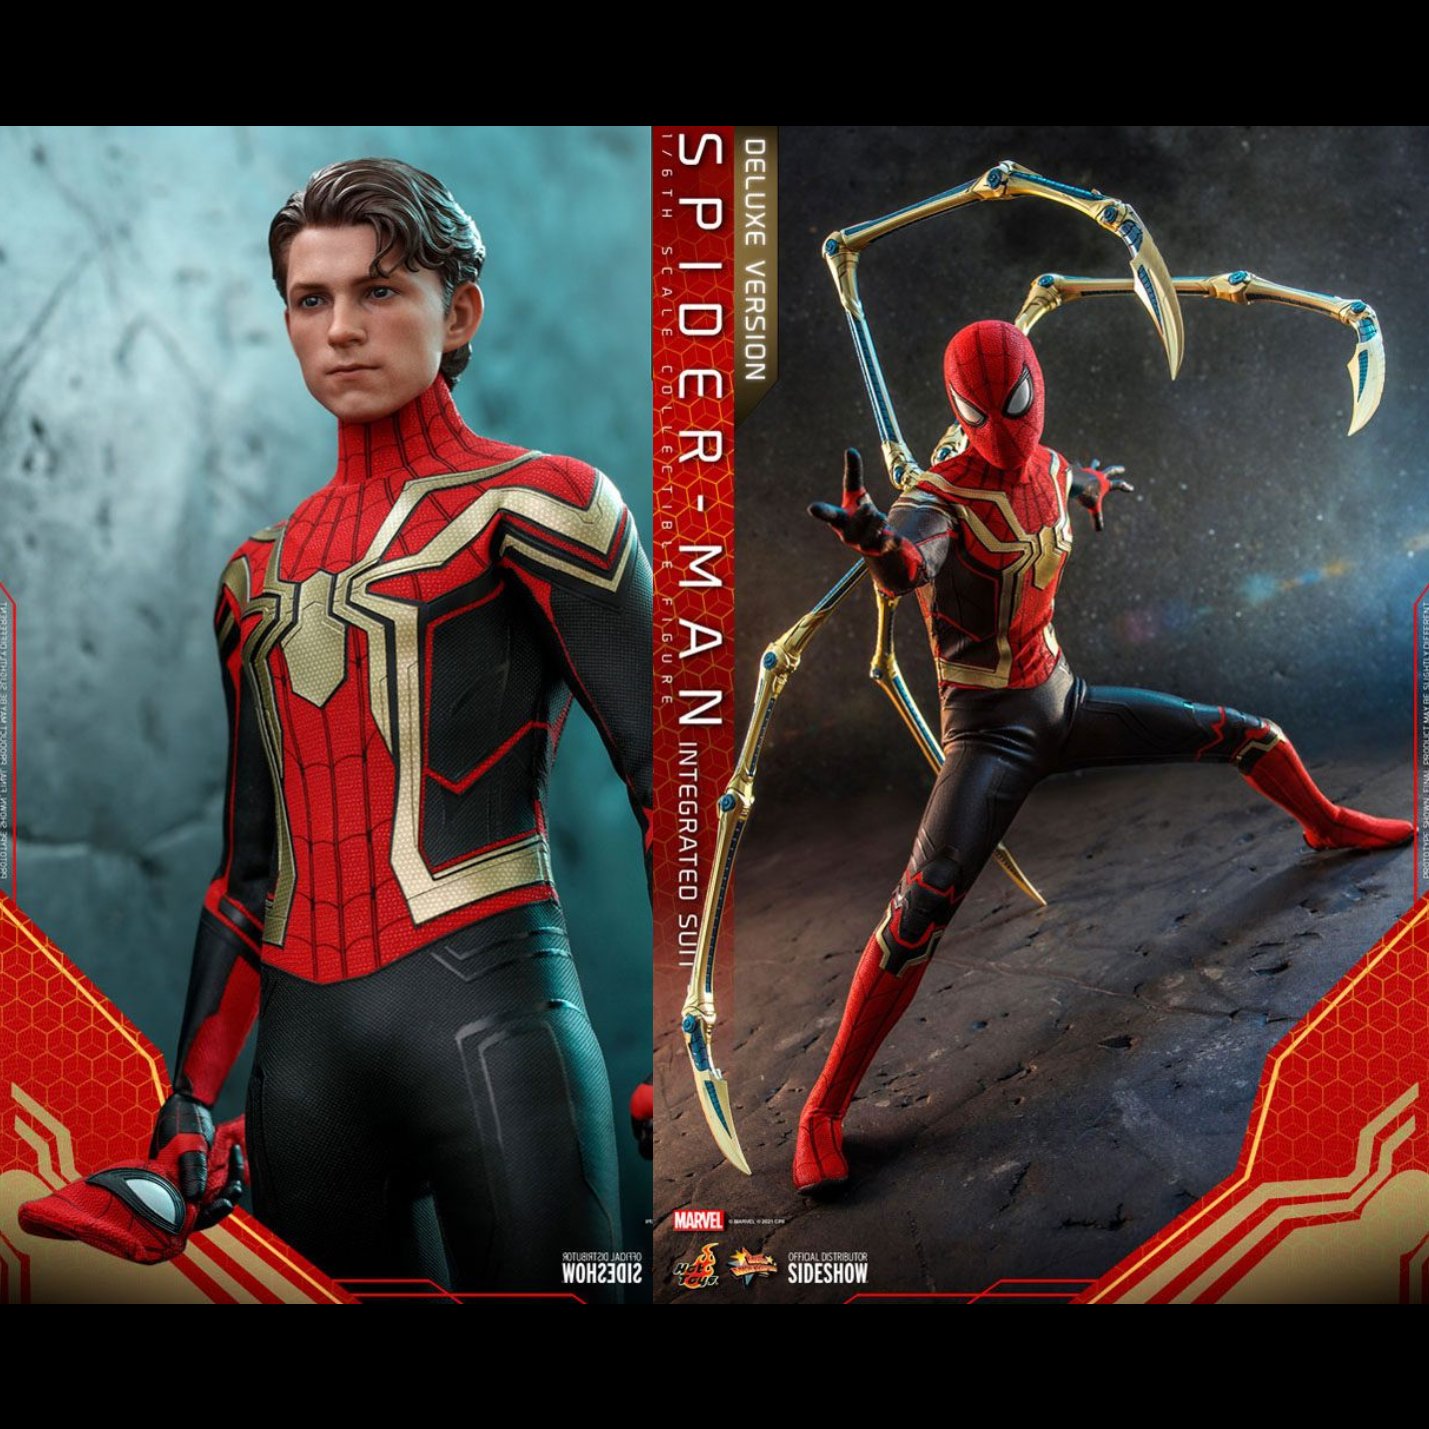 Hot Toys Spider-Man: No Way Home Spider-Man (Integrated Suit